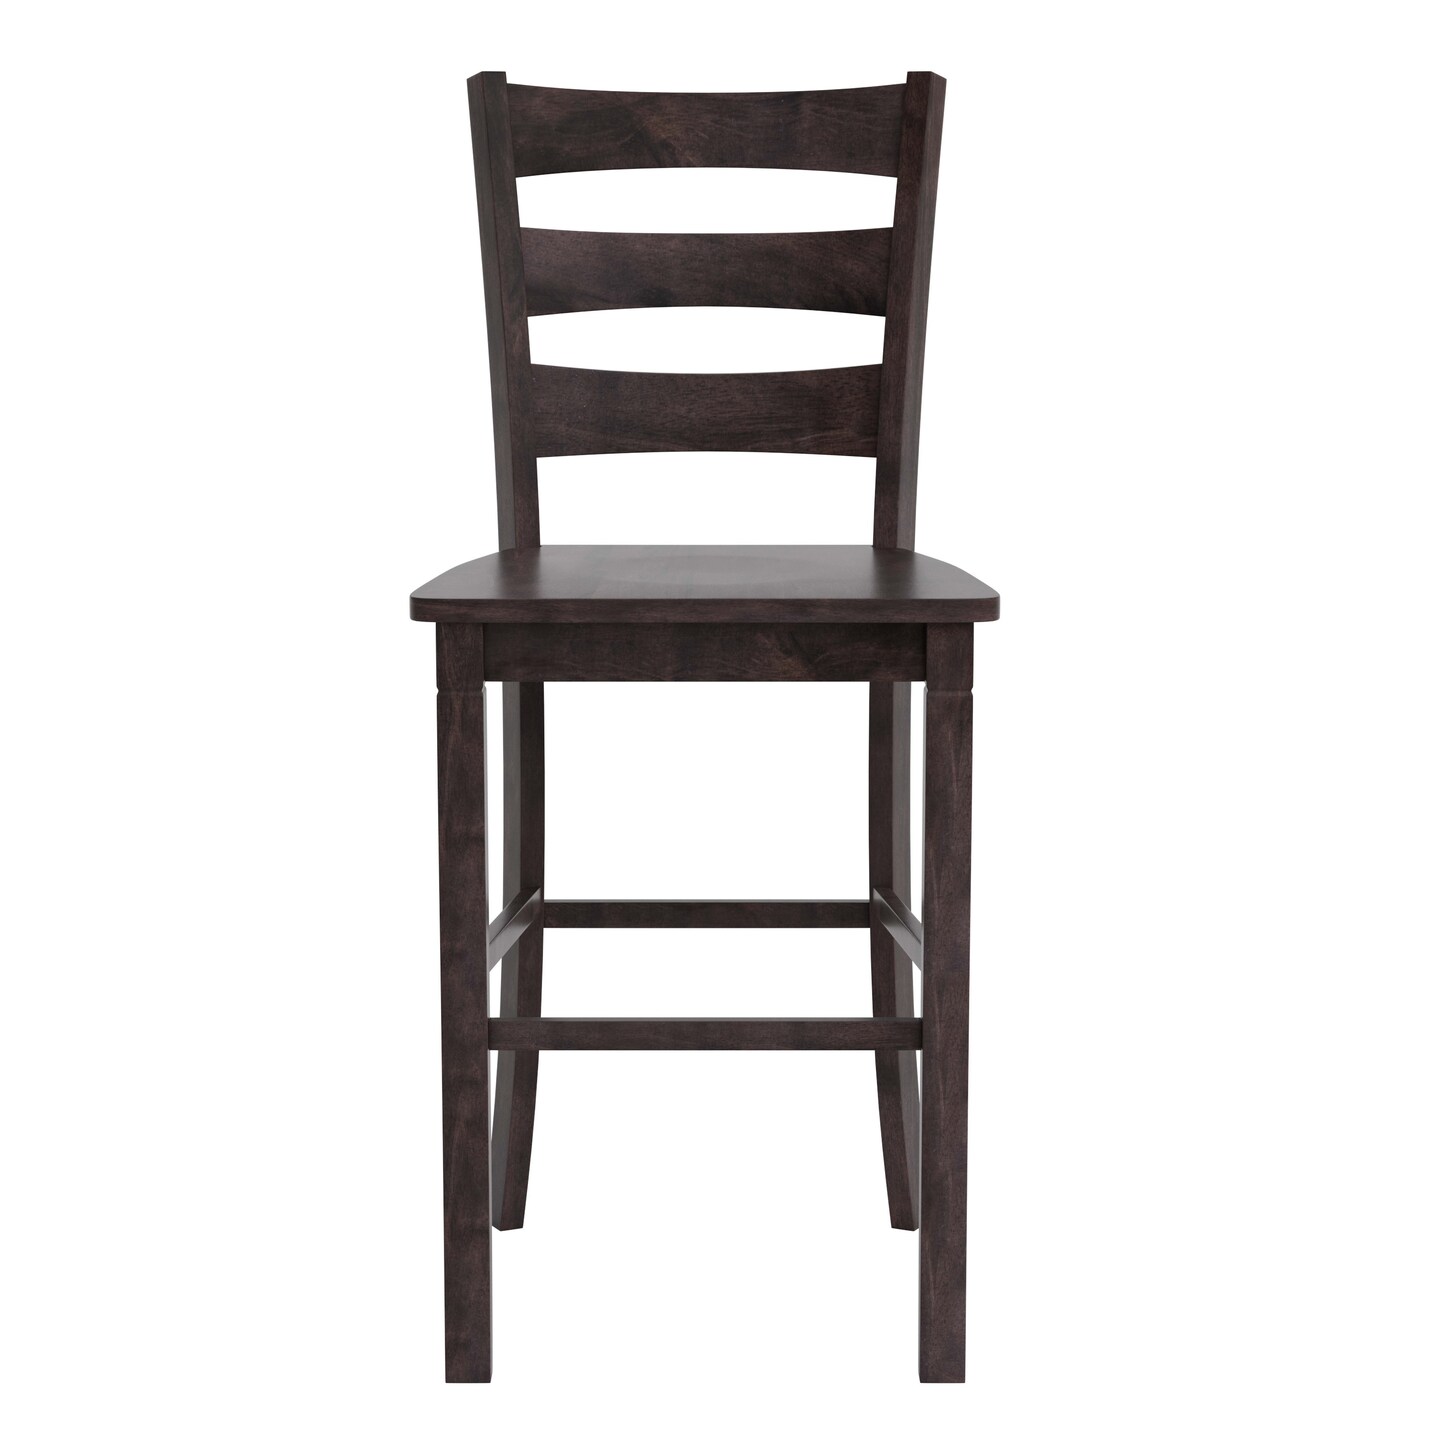 Merrick Lane Verity Set of Two Classic Wooden Ladderback Counter Height Barstools with Solid Wood Seats